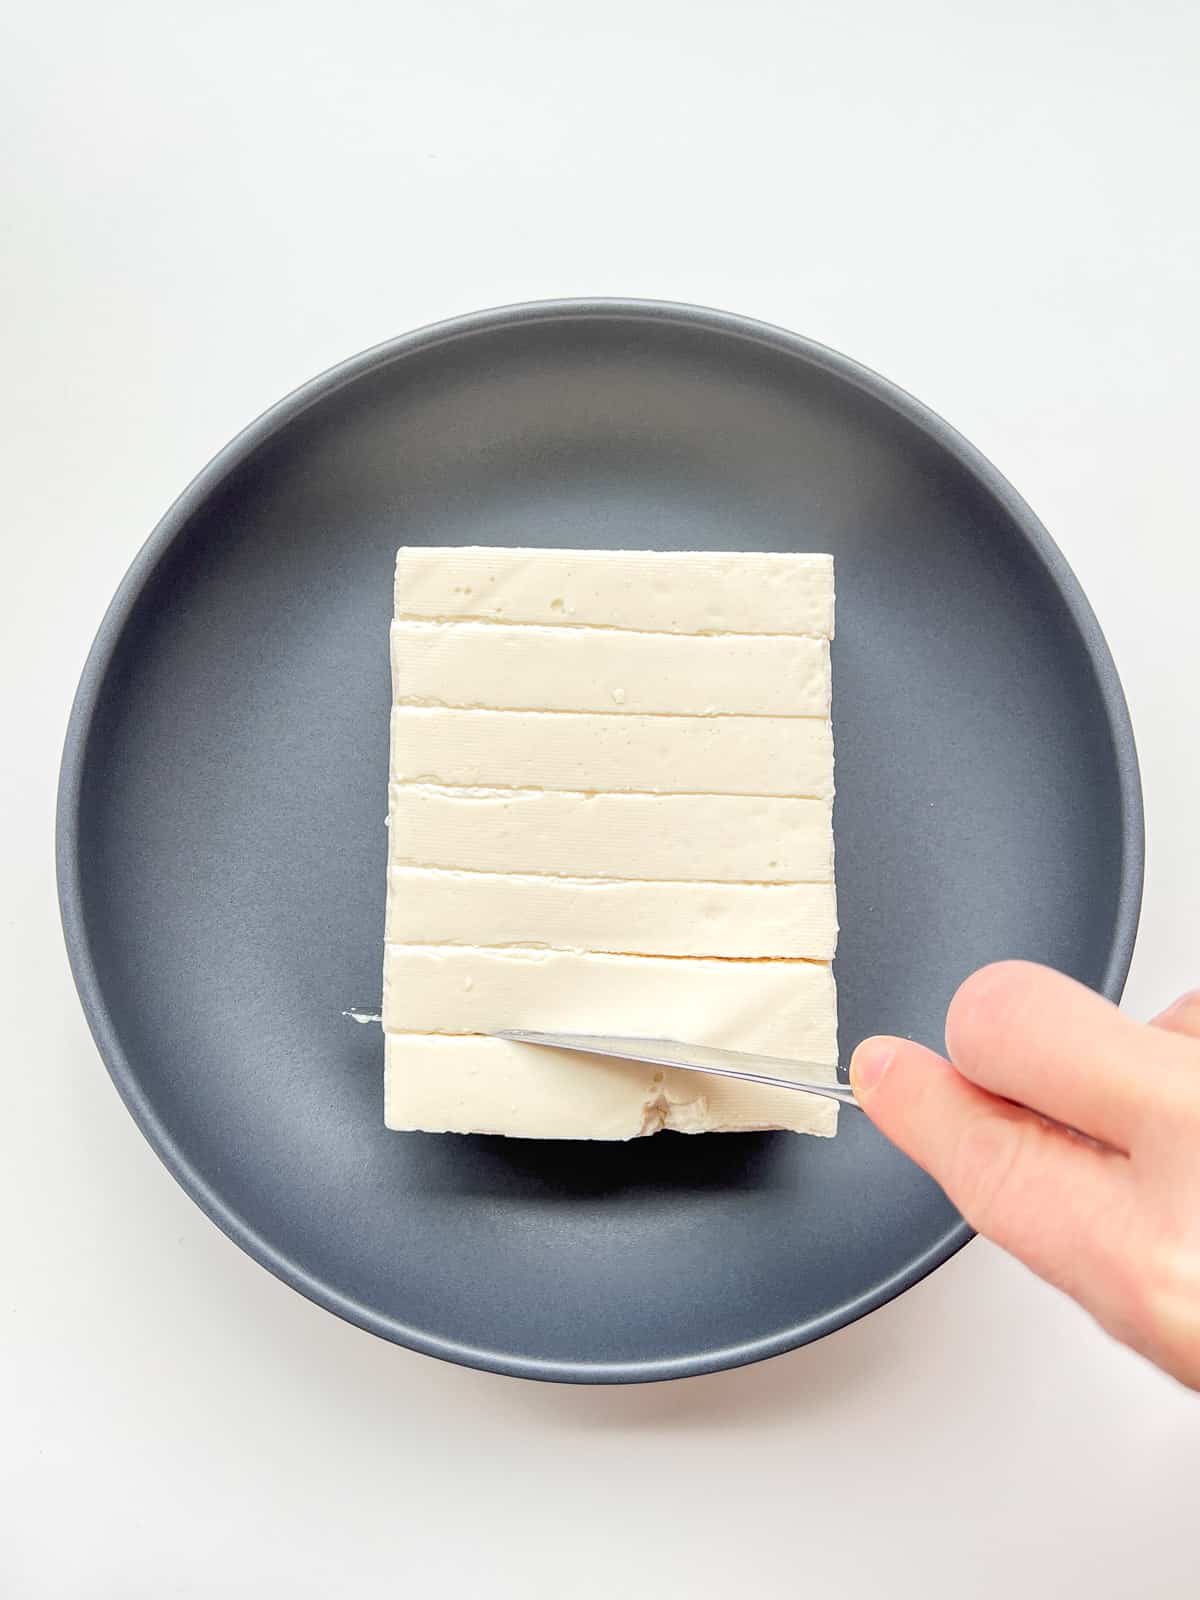 An image of tofu in a grey dish, with a hand shown cutting the tofu into slices.